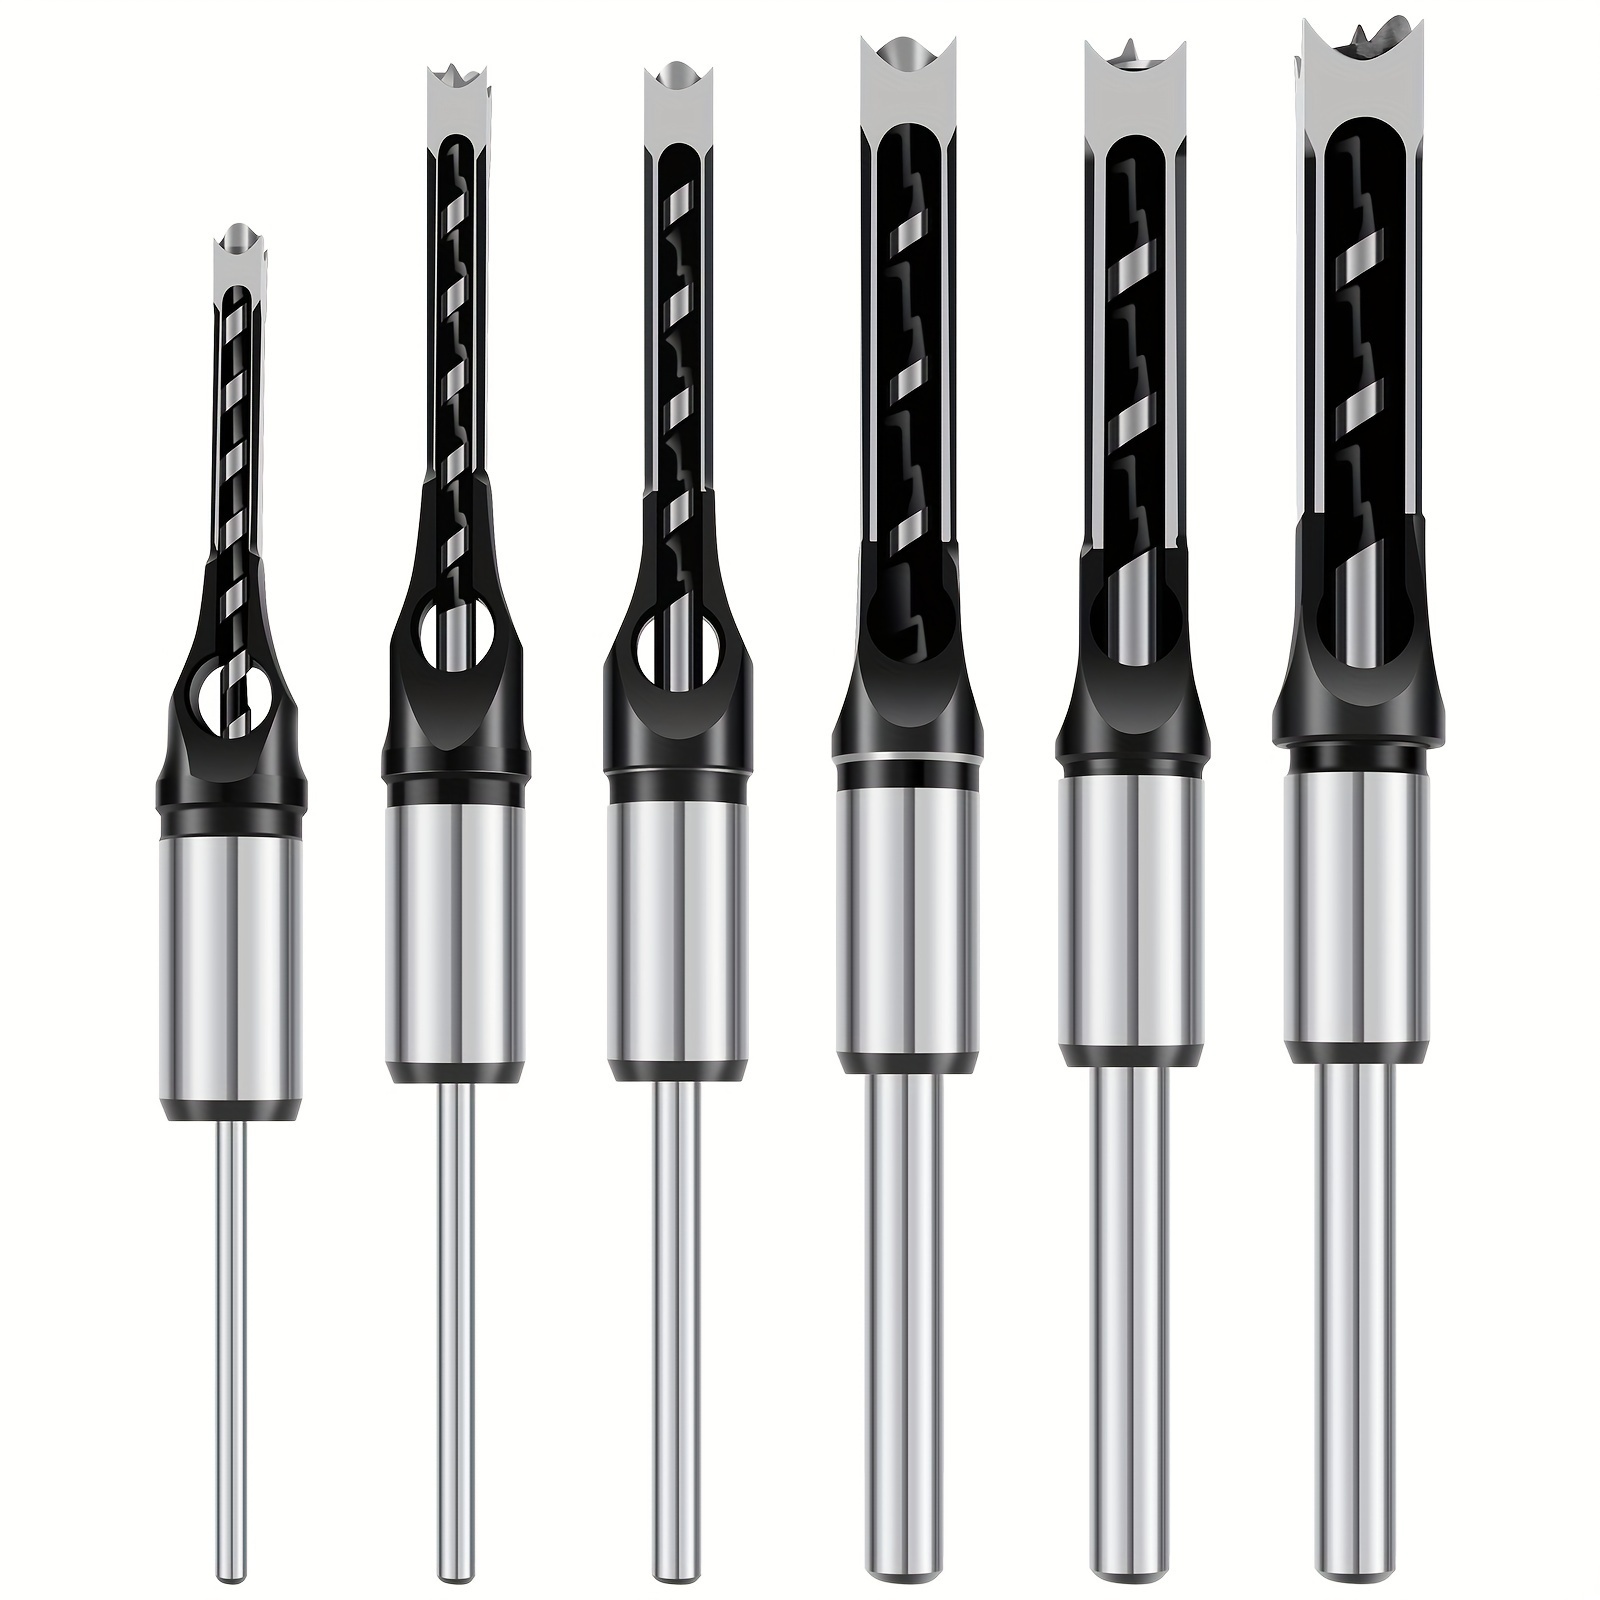 

6pcs Square Hole Drill Bits High Speed Steel Mortising Chisel Drill Bit High Hardness Woodworking Hole Saw Drill Bit Set With 1/4inch 5/16inch 3/8inch 1/2inch 5/8inch 9/16inch For Wood